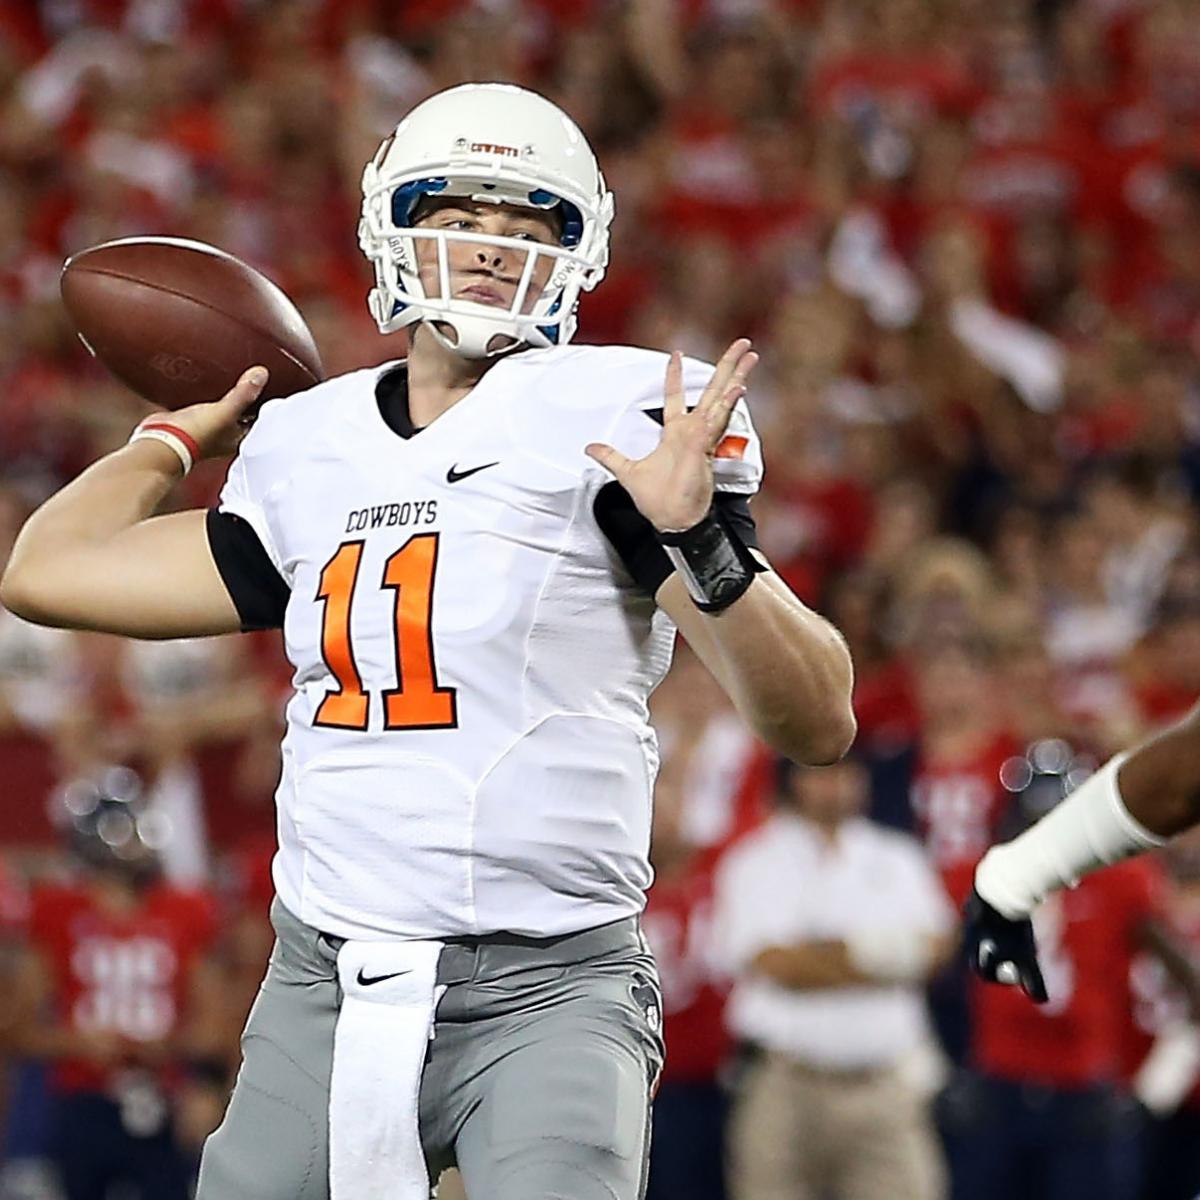 Wes Lunt to Illinois Is a Win-Win Scenario for Both Parties | News ...